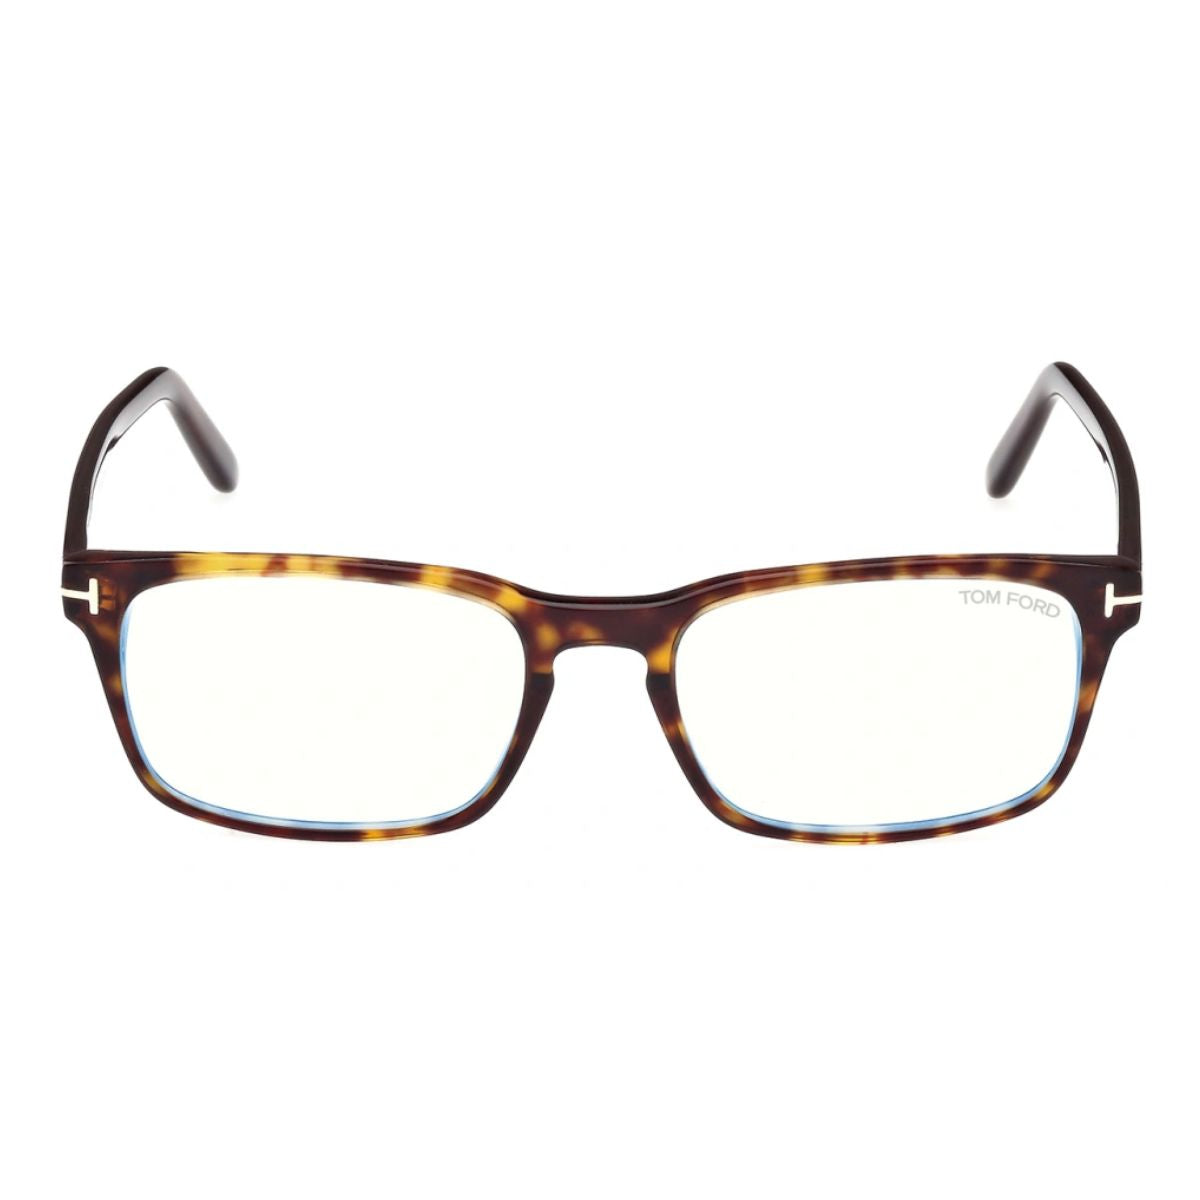 "Tom Ford TF 5938 052 optical glasses for men with a rectangular shape and Havana color frame, available at Optorium with free shipping across India."